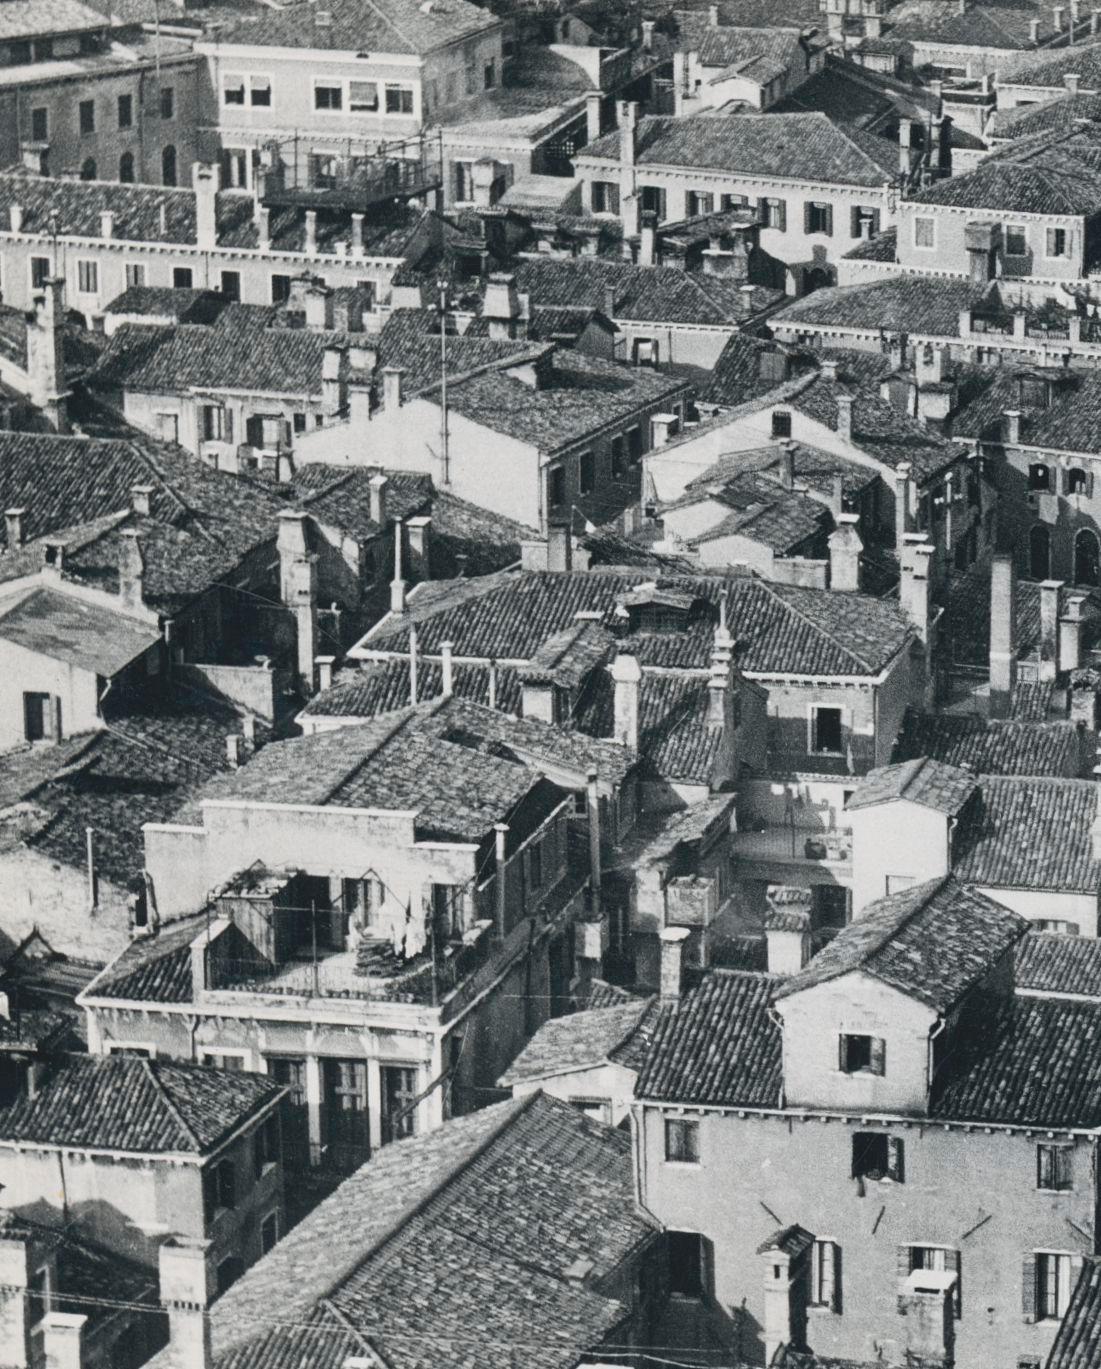 Houses from above, Black and White, Italy 1950s, 13 x 17, 9 cm - Photograph by Erich Andres